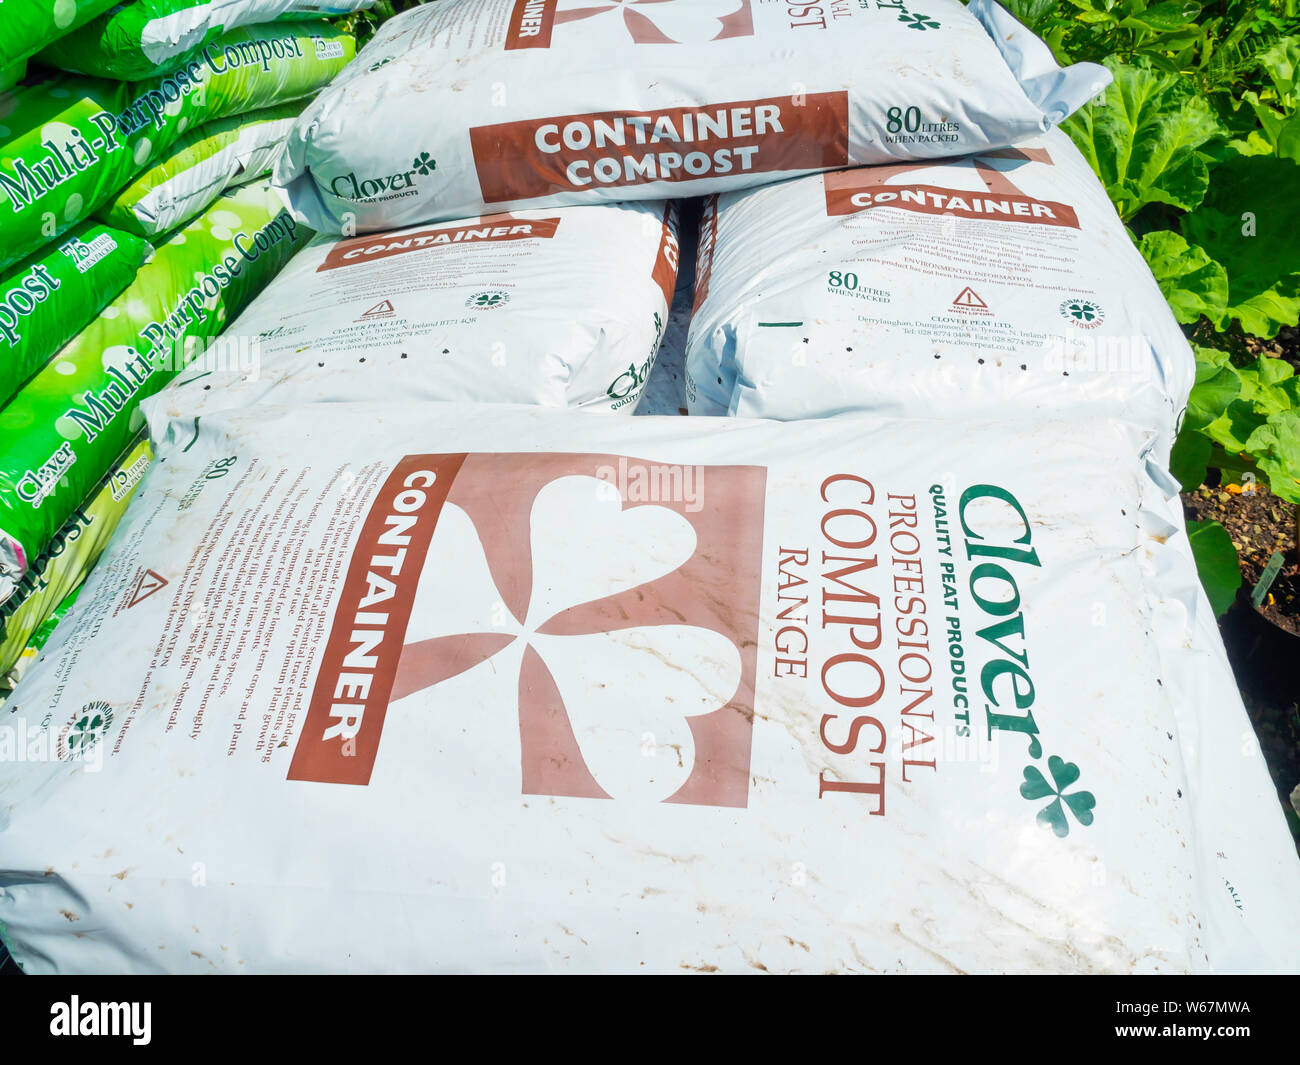 A Stack Of Bags Of Clover Brand Container Compost In A Garden